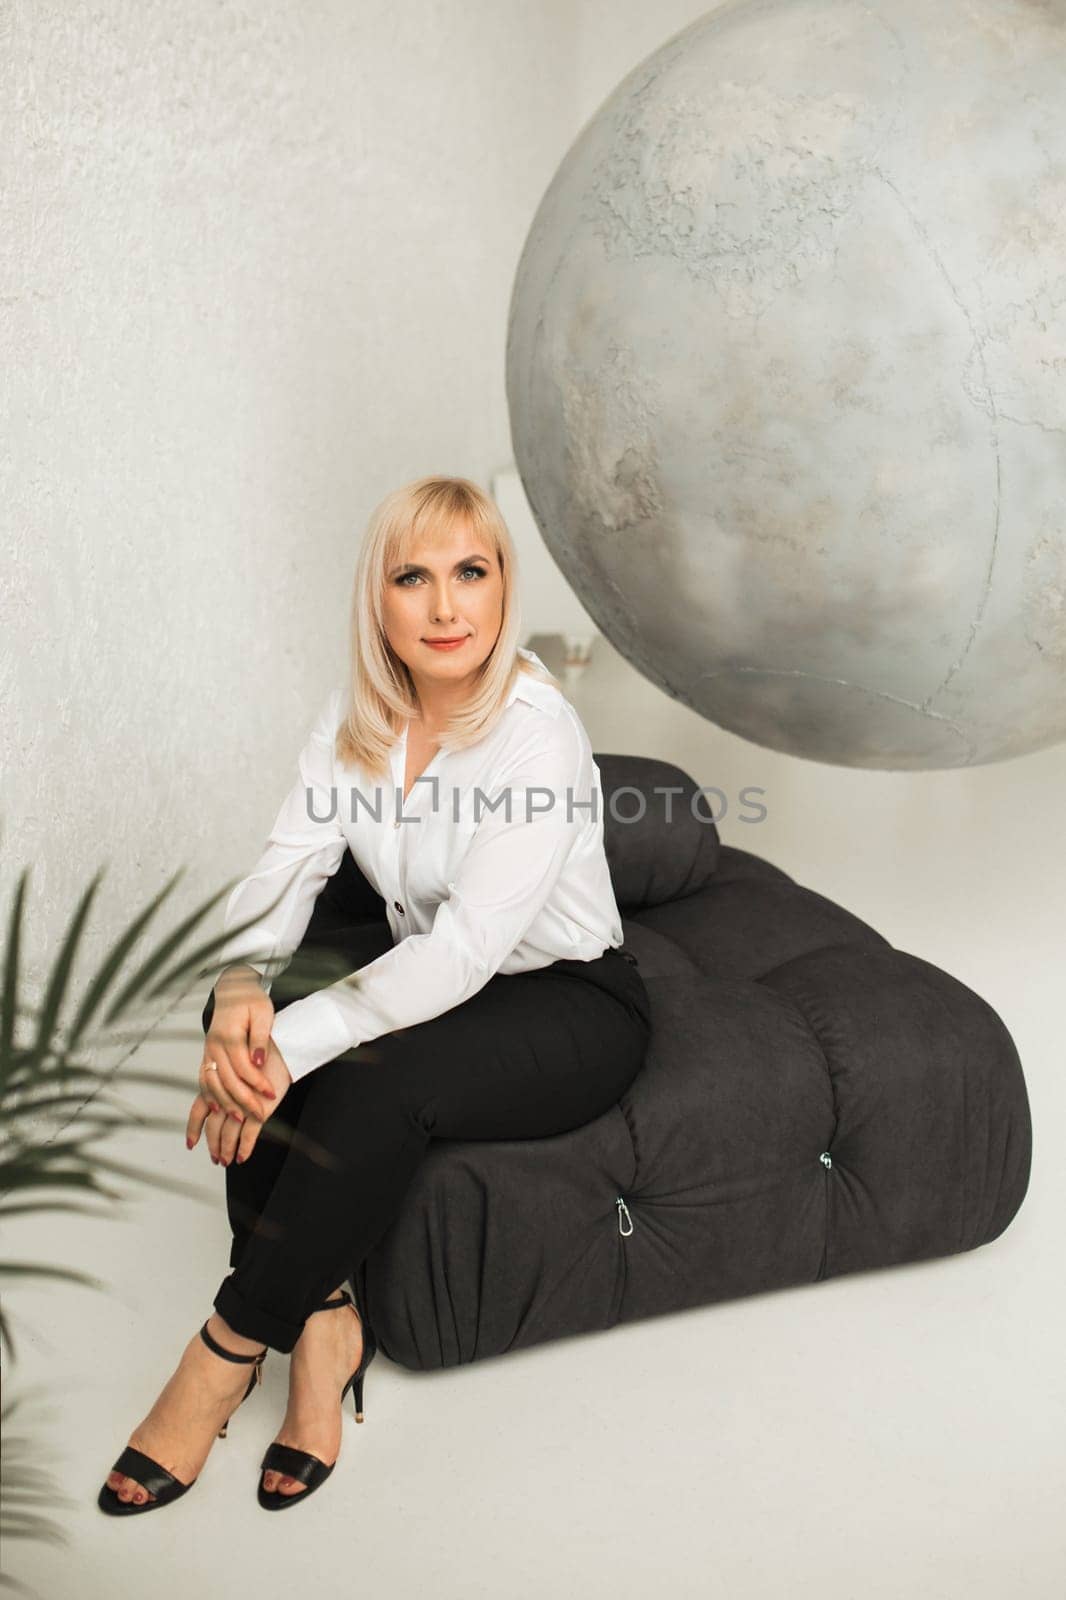 A fashionable woman In a white shirt and black pants poses in the interior by Lobachad